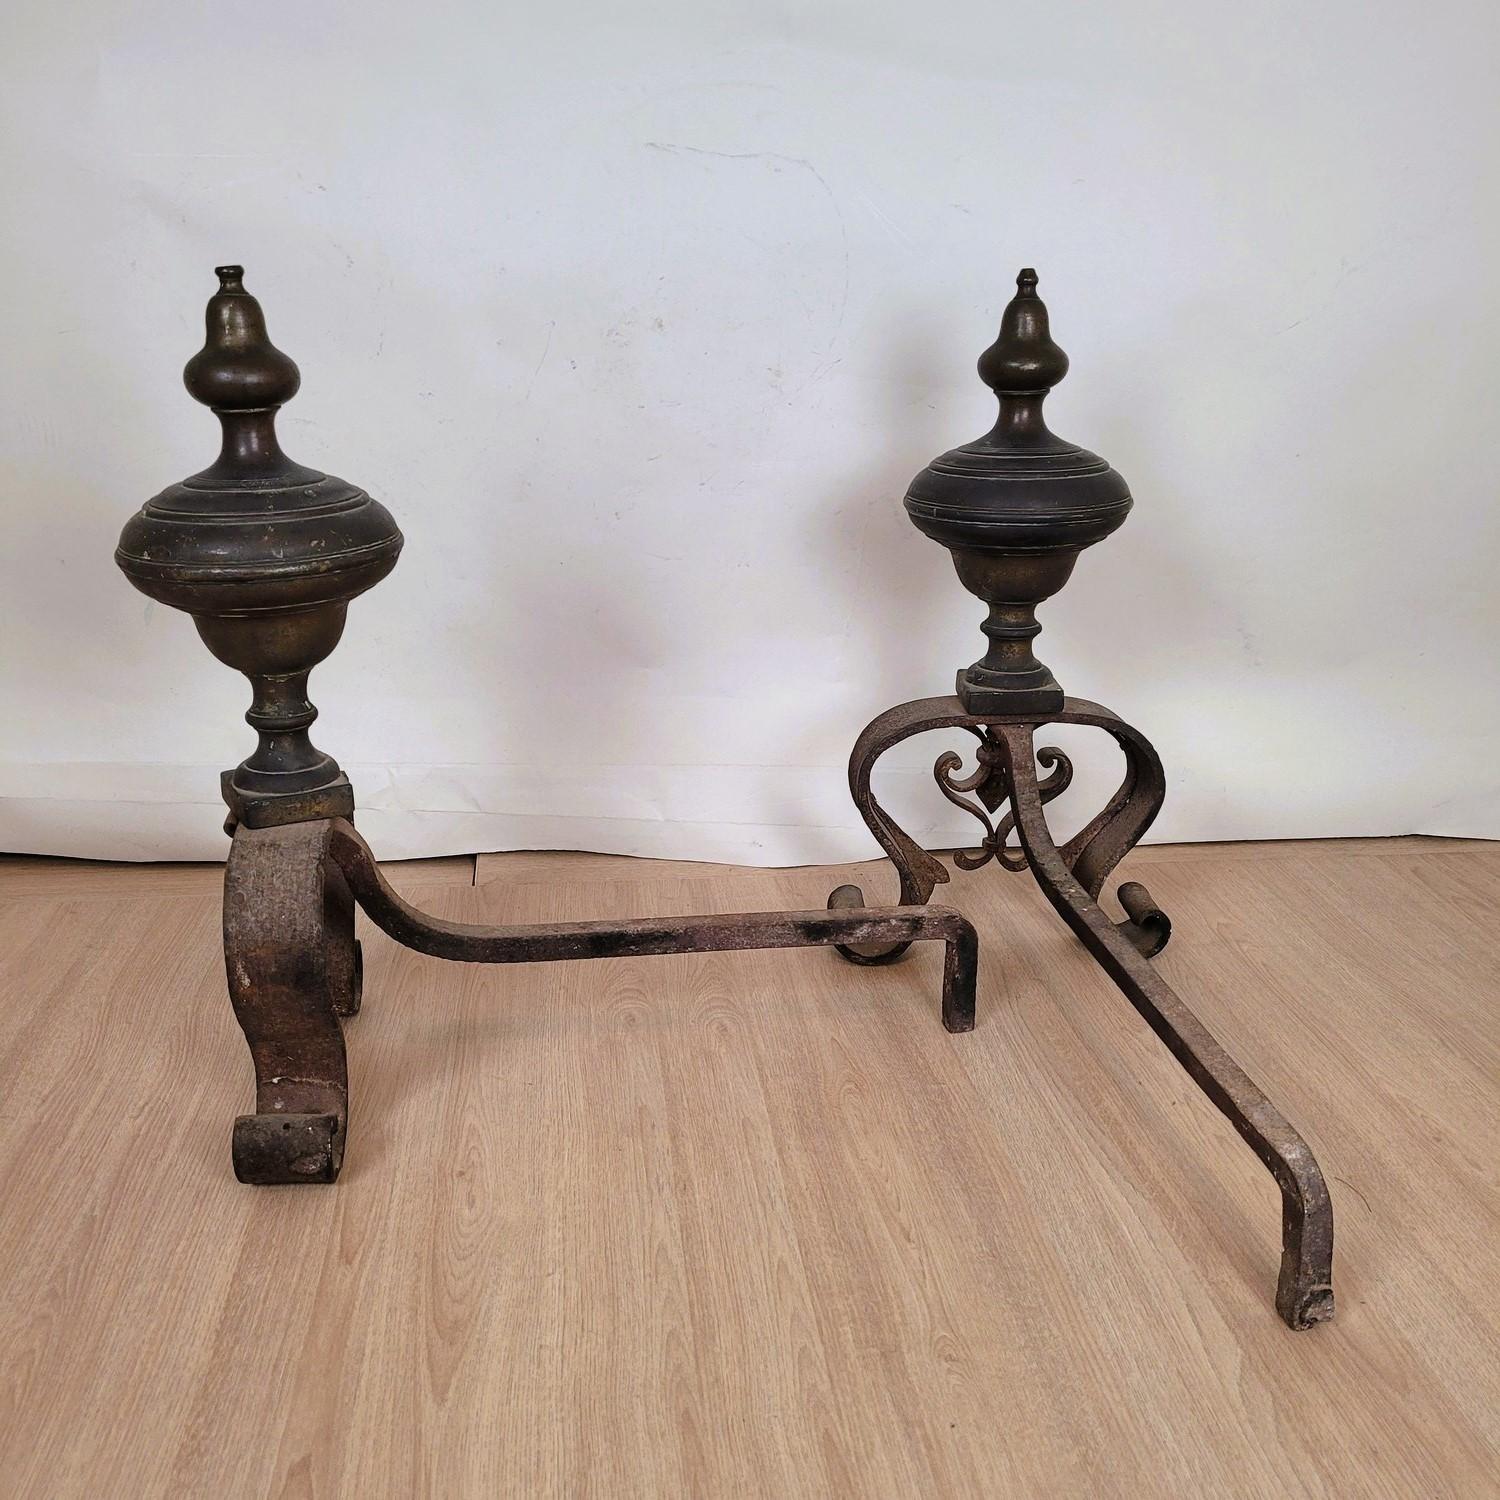 Pair Of Andirons In Bronze And Wrought Iron, 19th Century For Sale 6